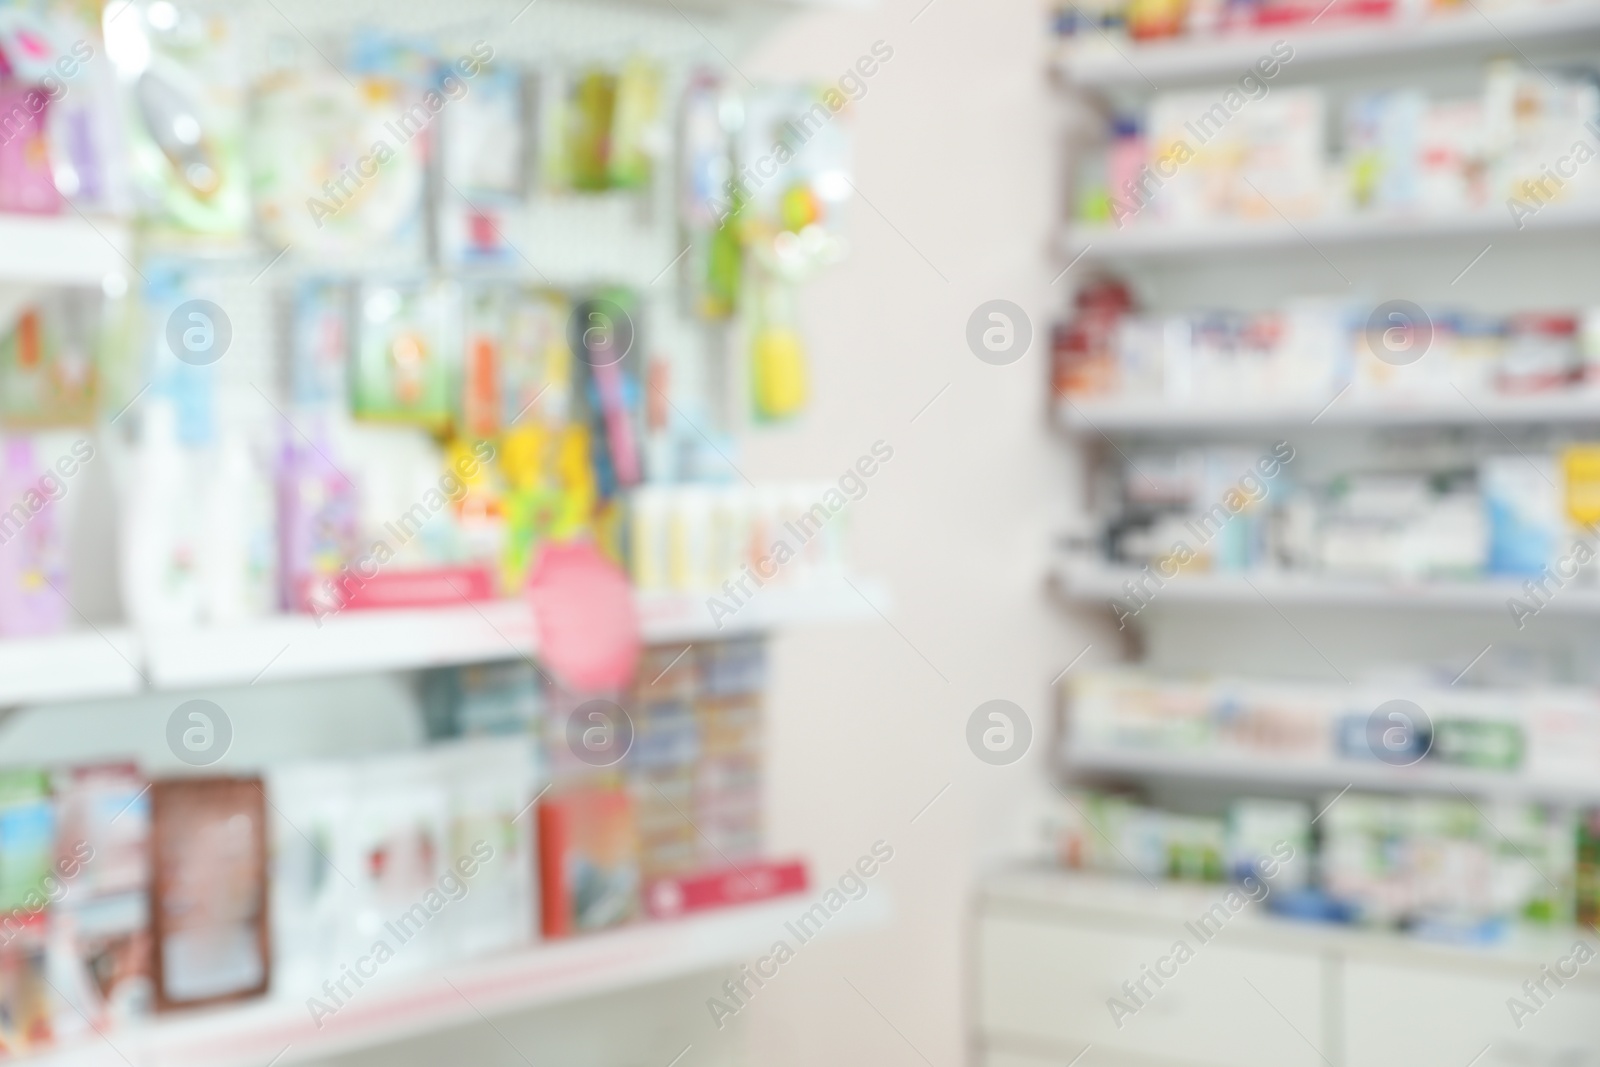 Image of Shelves with pharmaceuticals in drugstore, blurred view